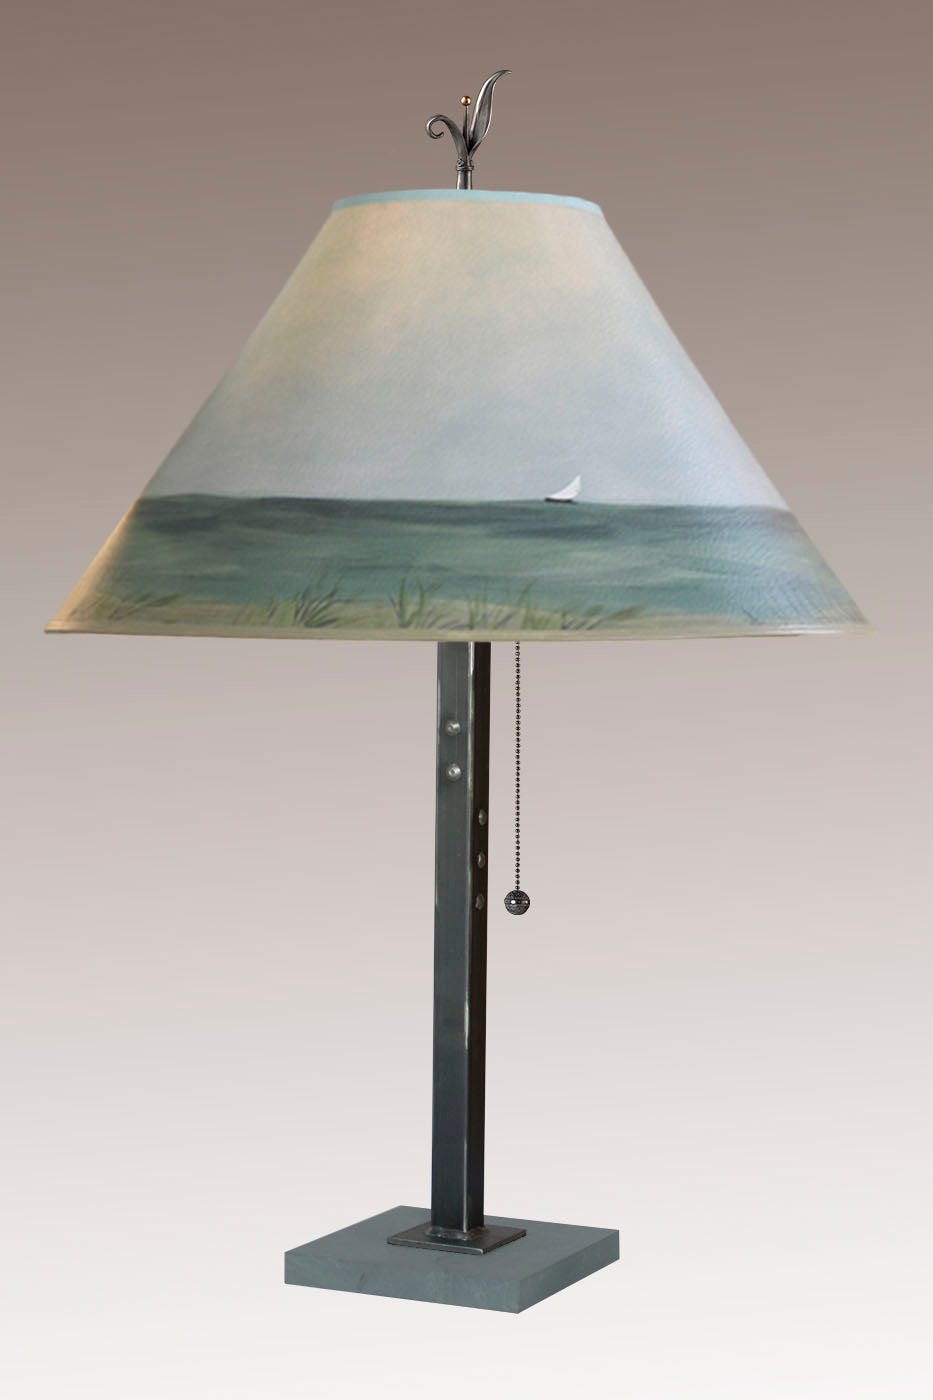 Janna Ugone &amp; Co Table Lamps Steel Table Lamp with Large Conical Shade in Shore